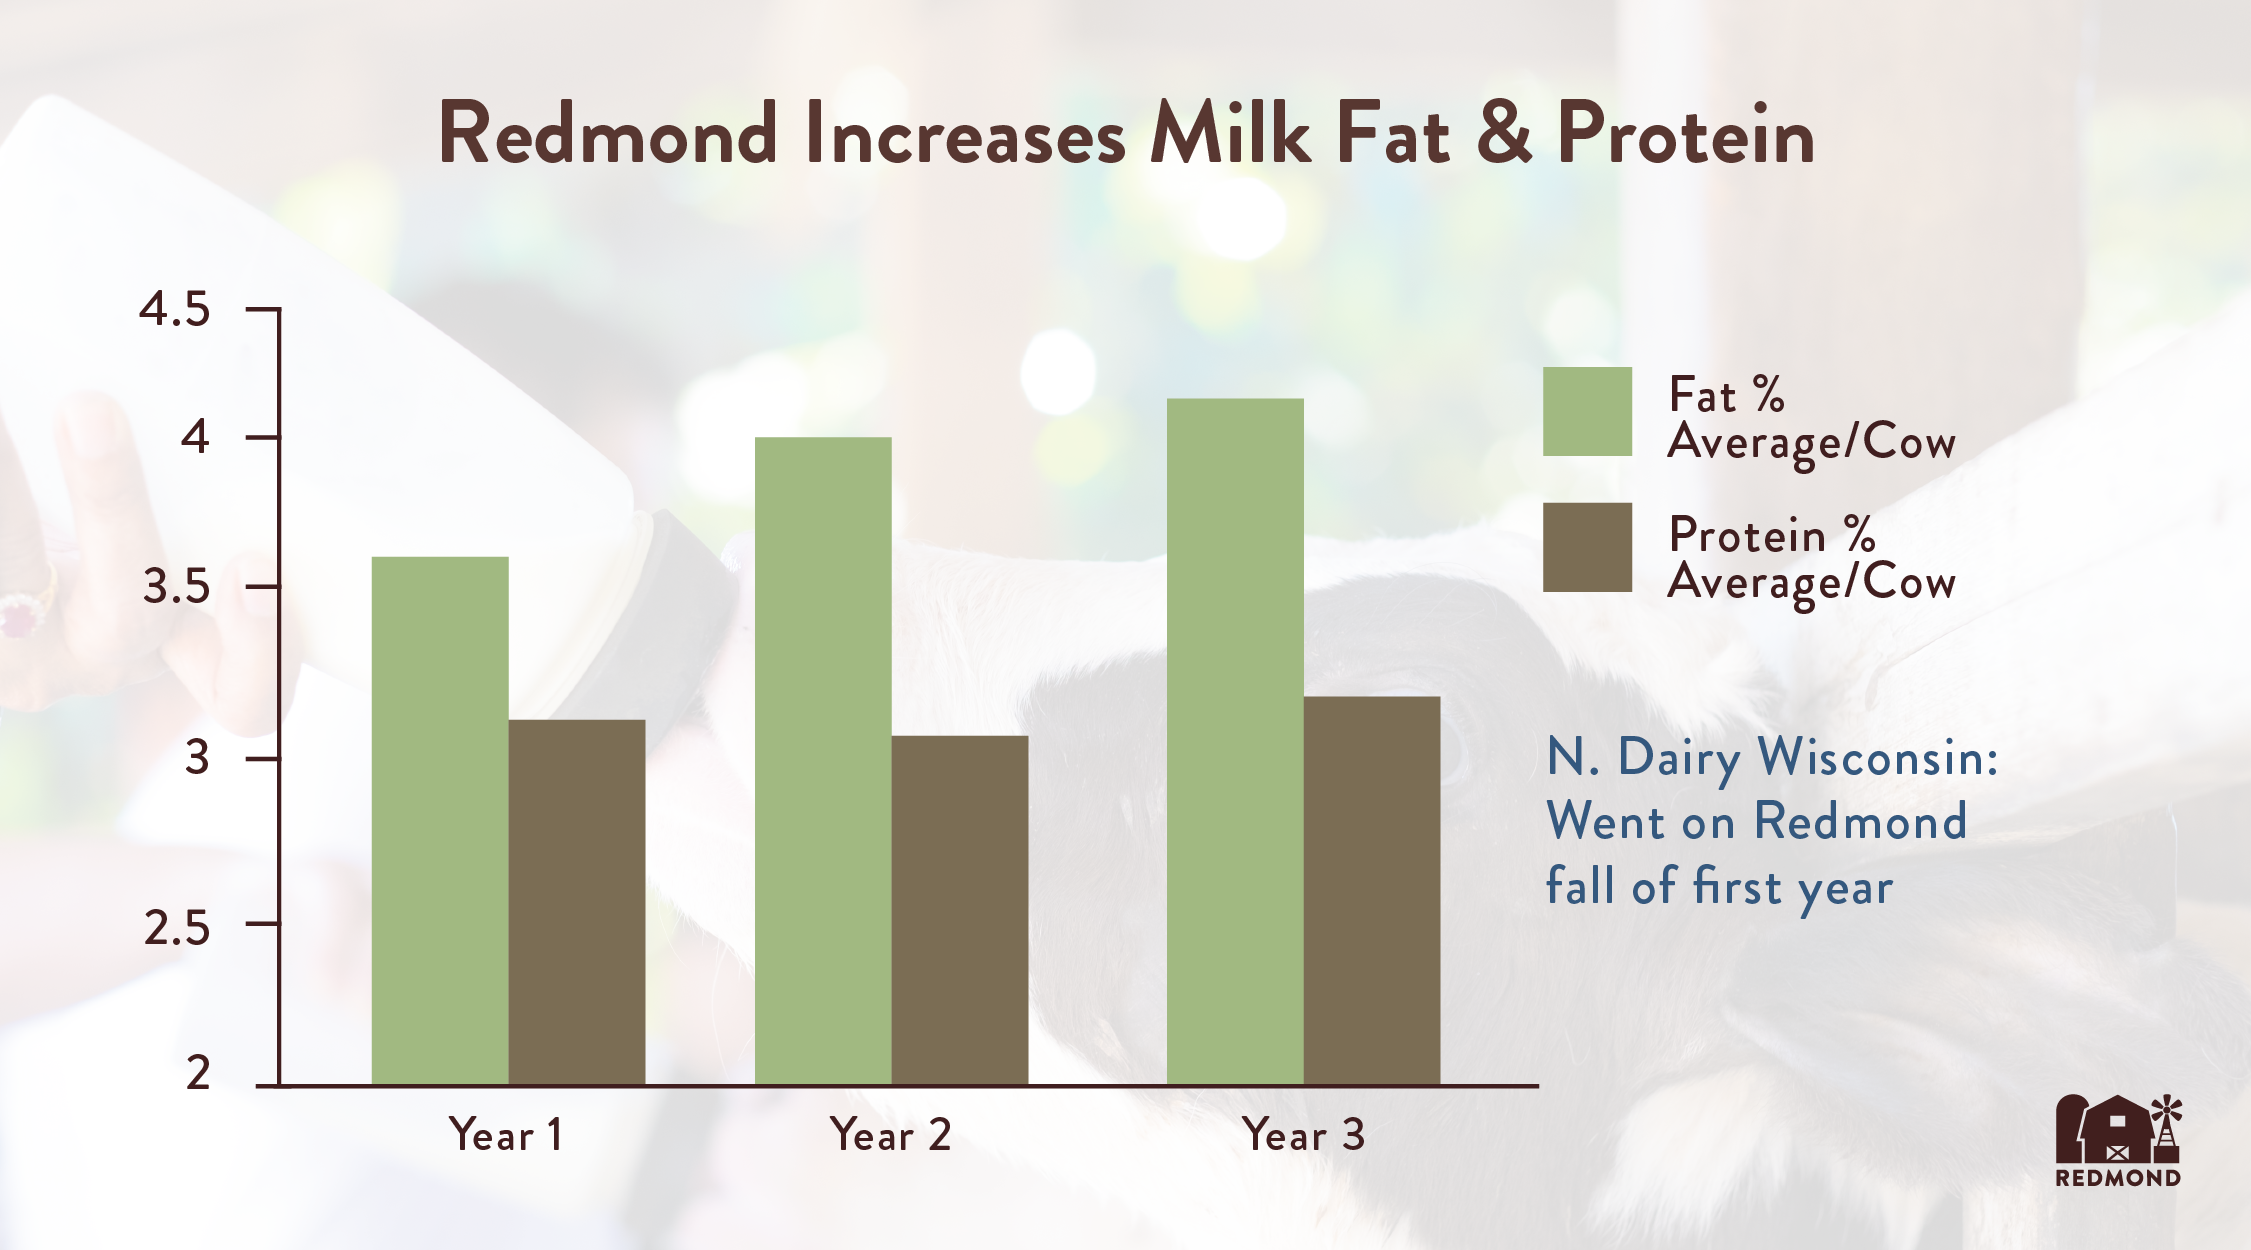 Redmond increases milk fat and protein